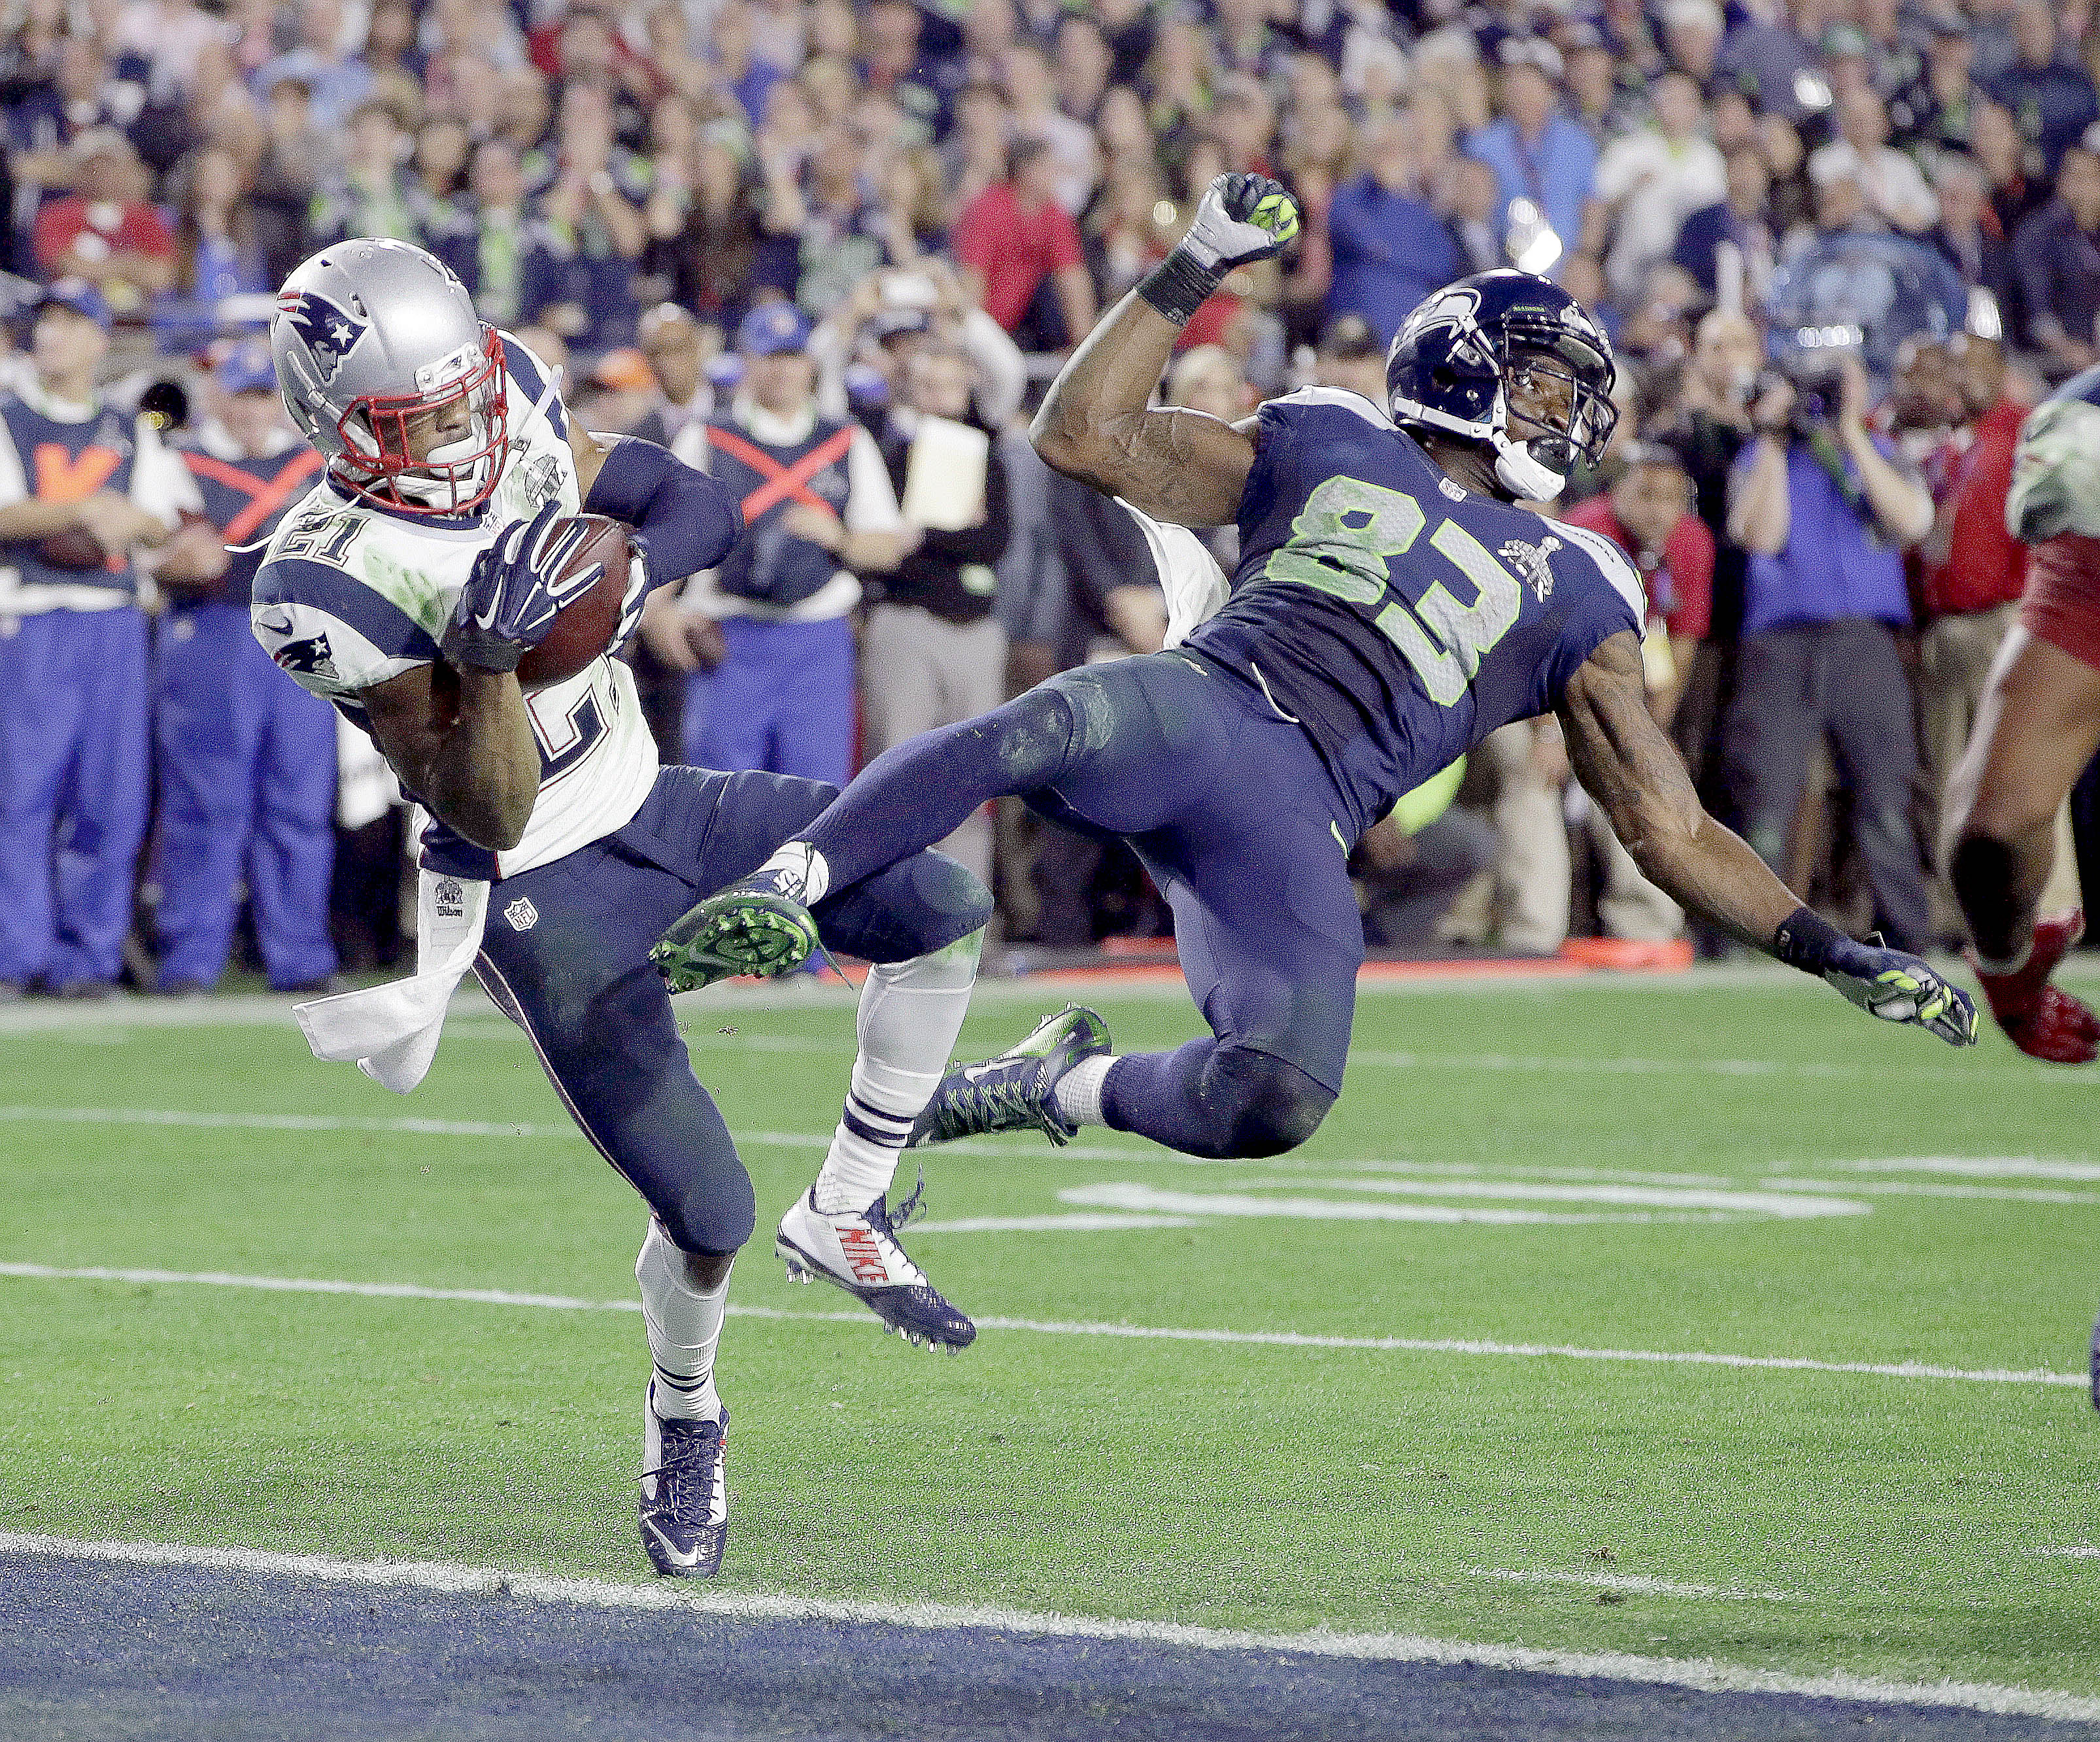 New England Patriots strong safety Malcolm Butler (21) intercepts a pass intended for Seattle Seahawks wide receiver Ricardo Lockette (83) during the final two minutes of Super Bowl XLIX football game. —Photo by The Associated Press ()